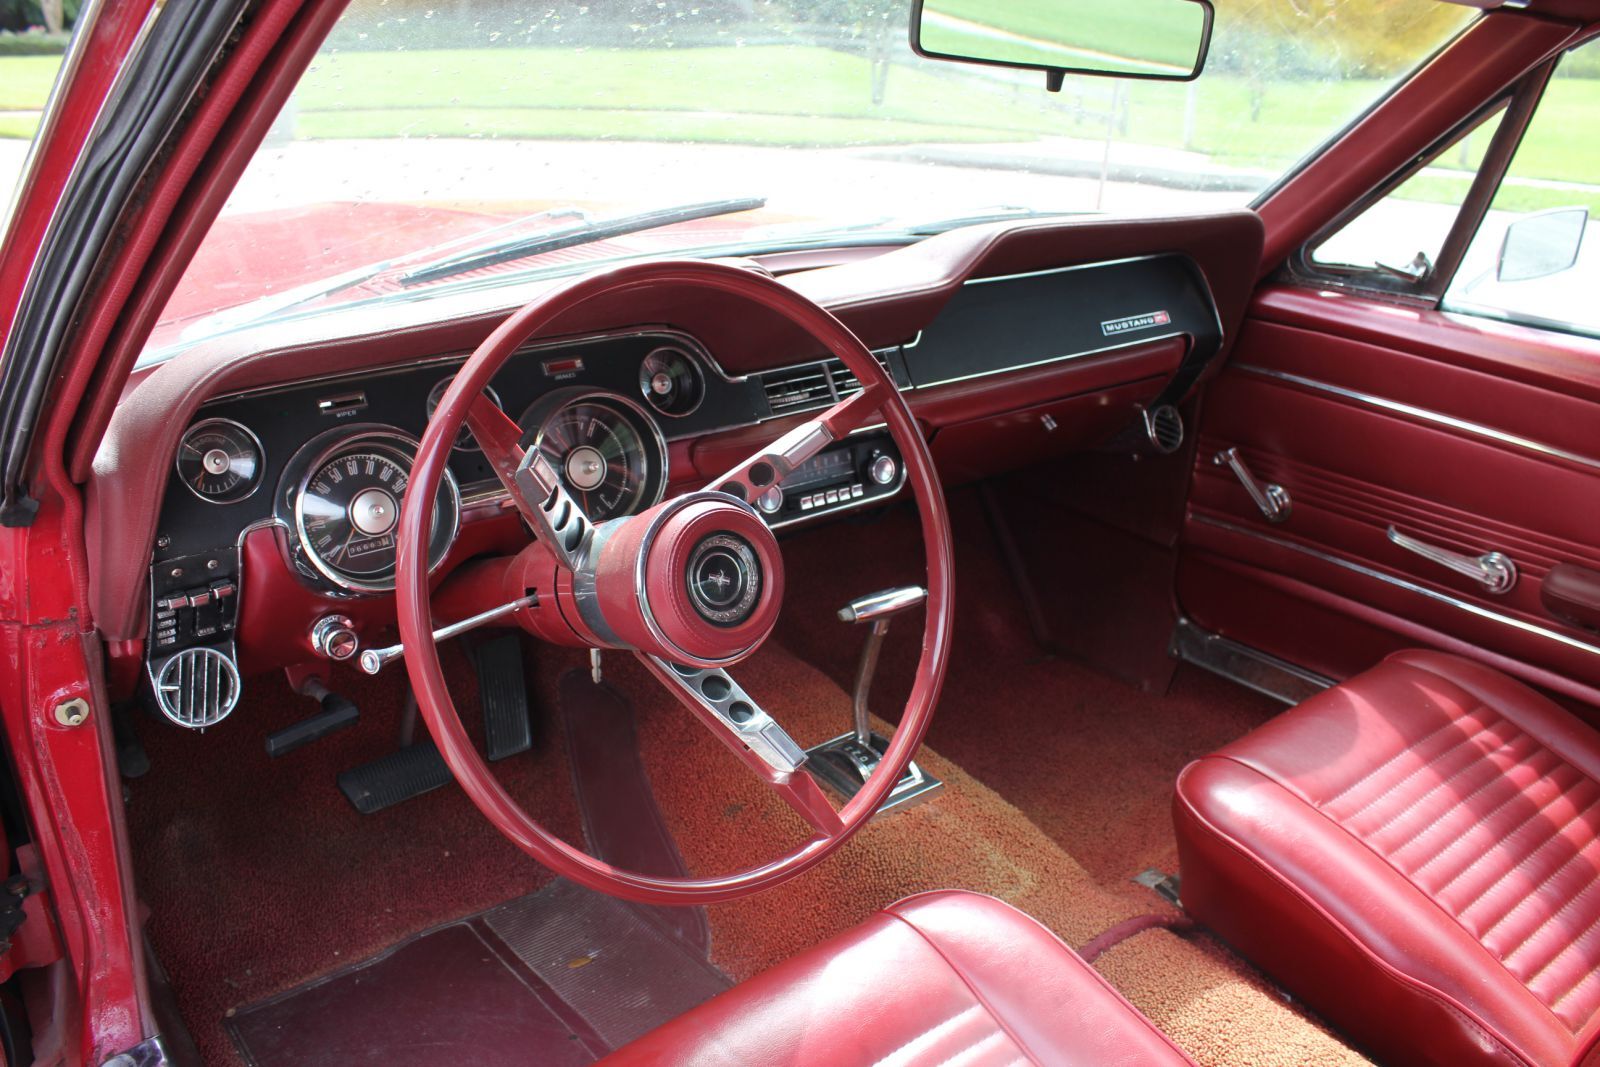 (Sample) The dashboard of a 1967 Ford Mustang